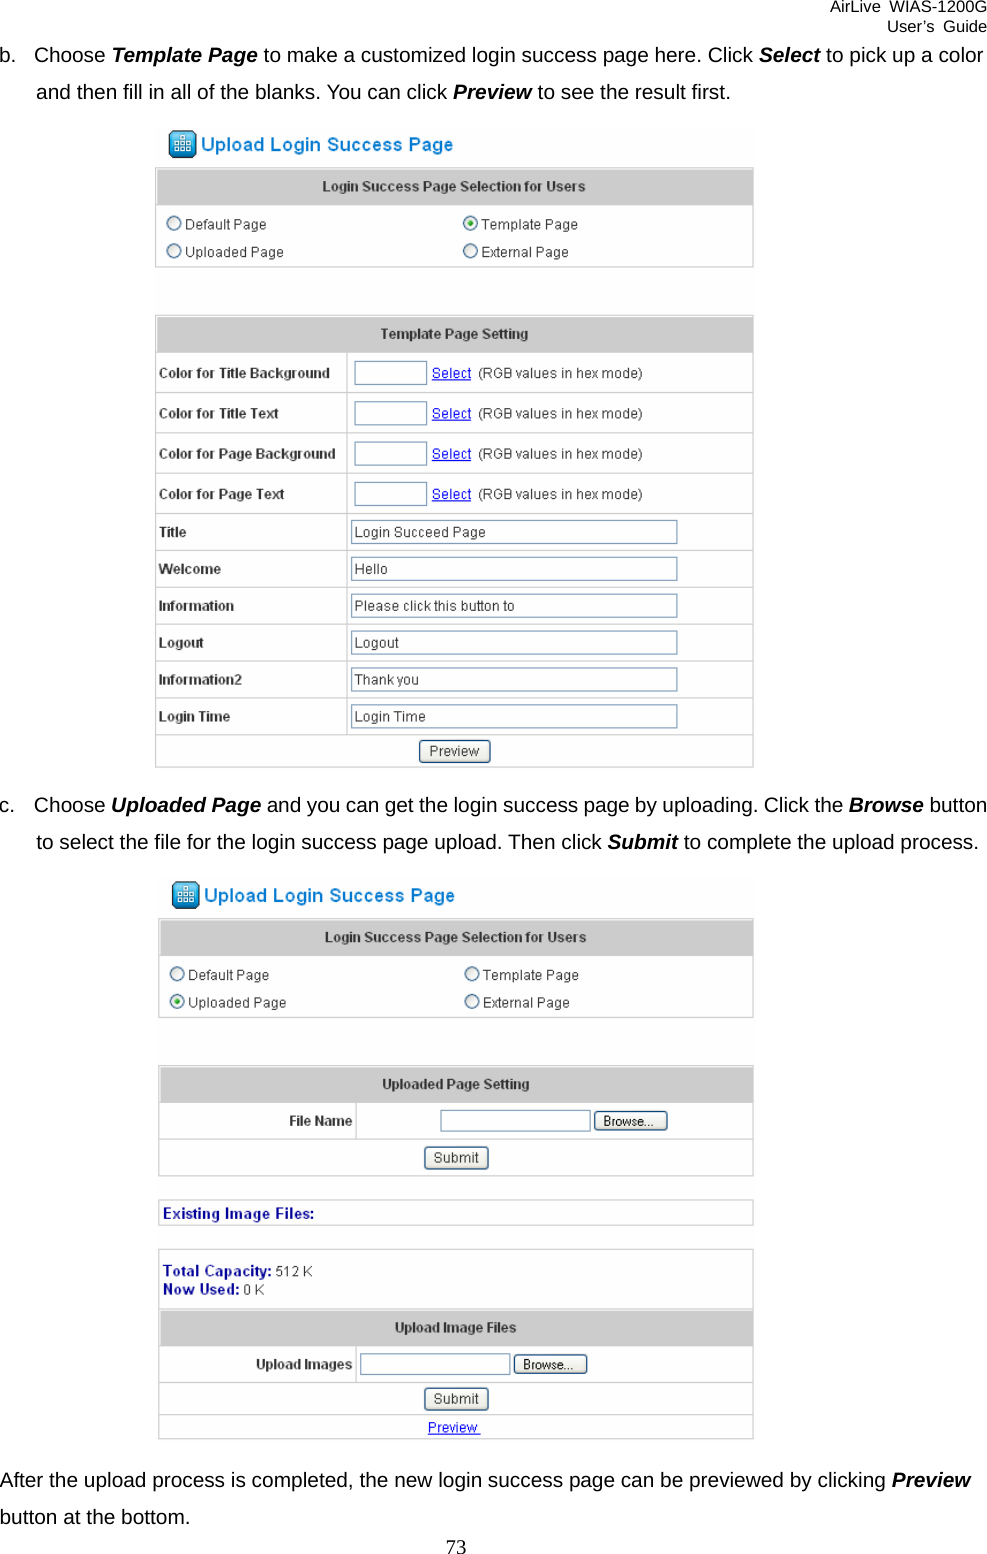 AirLive WIAS-1200G User’s Guide 73 b. Choose Template Page to make a customized login success page here. Click Select to pick up a color and then fill in all of the blanks. You can click Preview to see the result first.  c. Choose Uploaded Page and you can get the login success page by uploading. Click the Browse button to select the file for the login success page upload. Then click Submit to complete the upload process.  After the upload process is completed, the new login success page can be previewed by clicking Preview button at the bottom.   